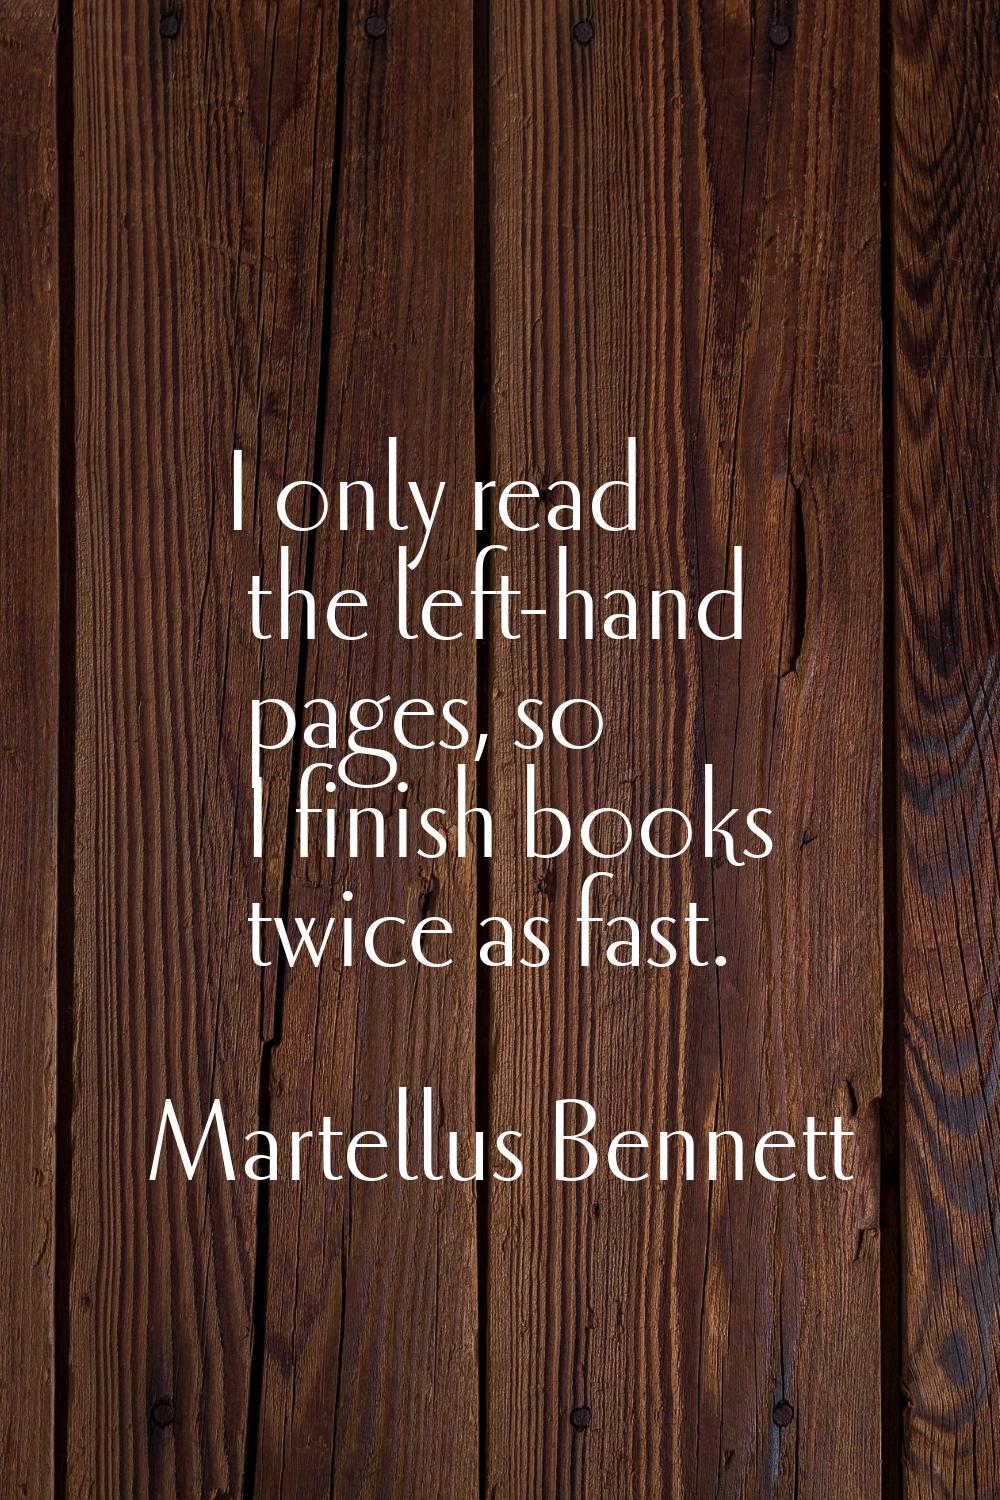 I only read the left-hand pages, so I finish books twice as fast.